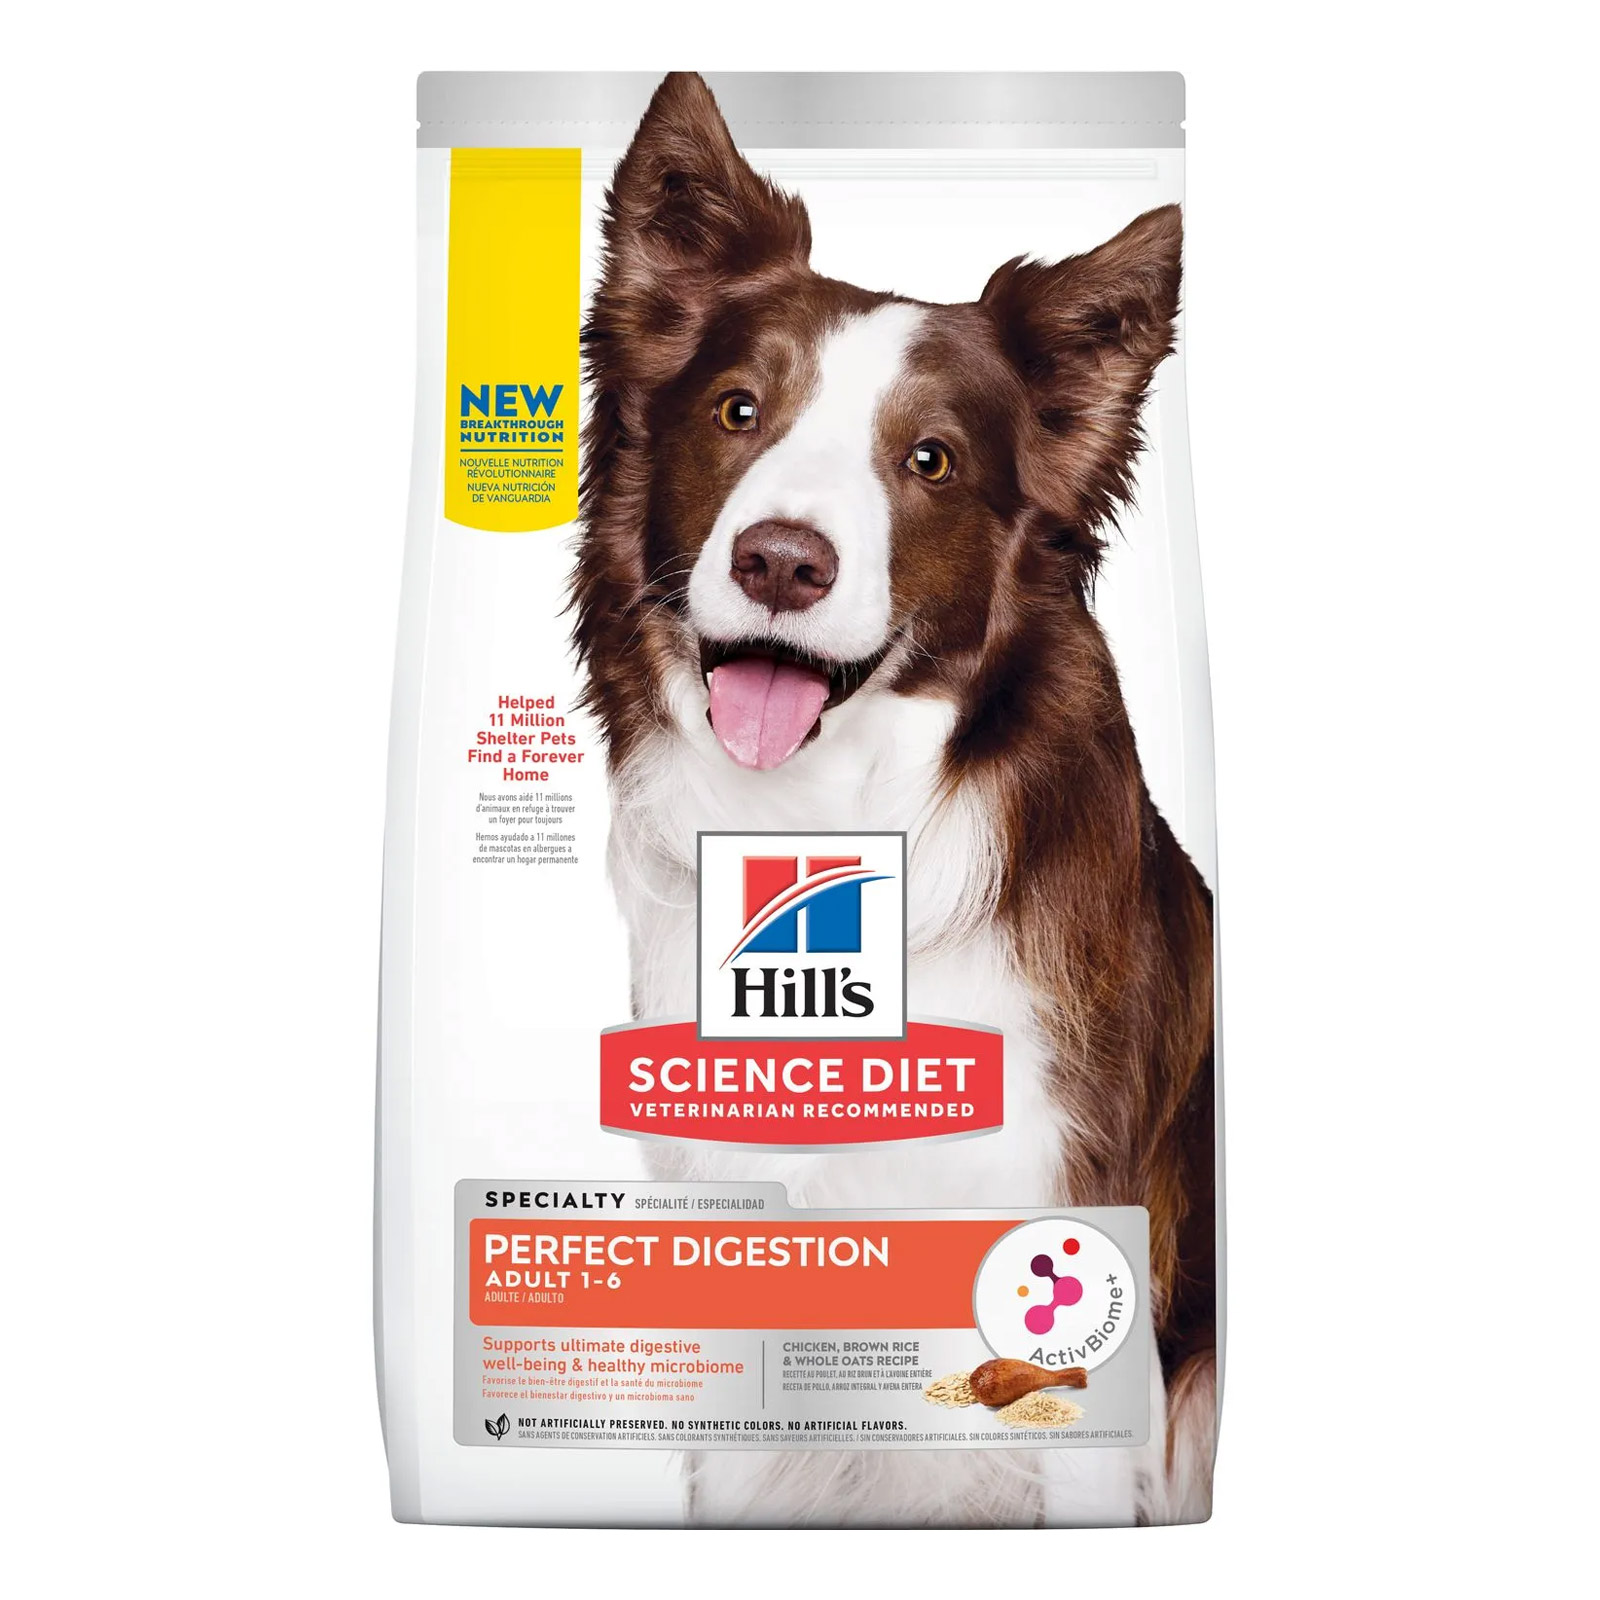 Hill's Science Diet Perfect Digestion Adult Dog Food for Food